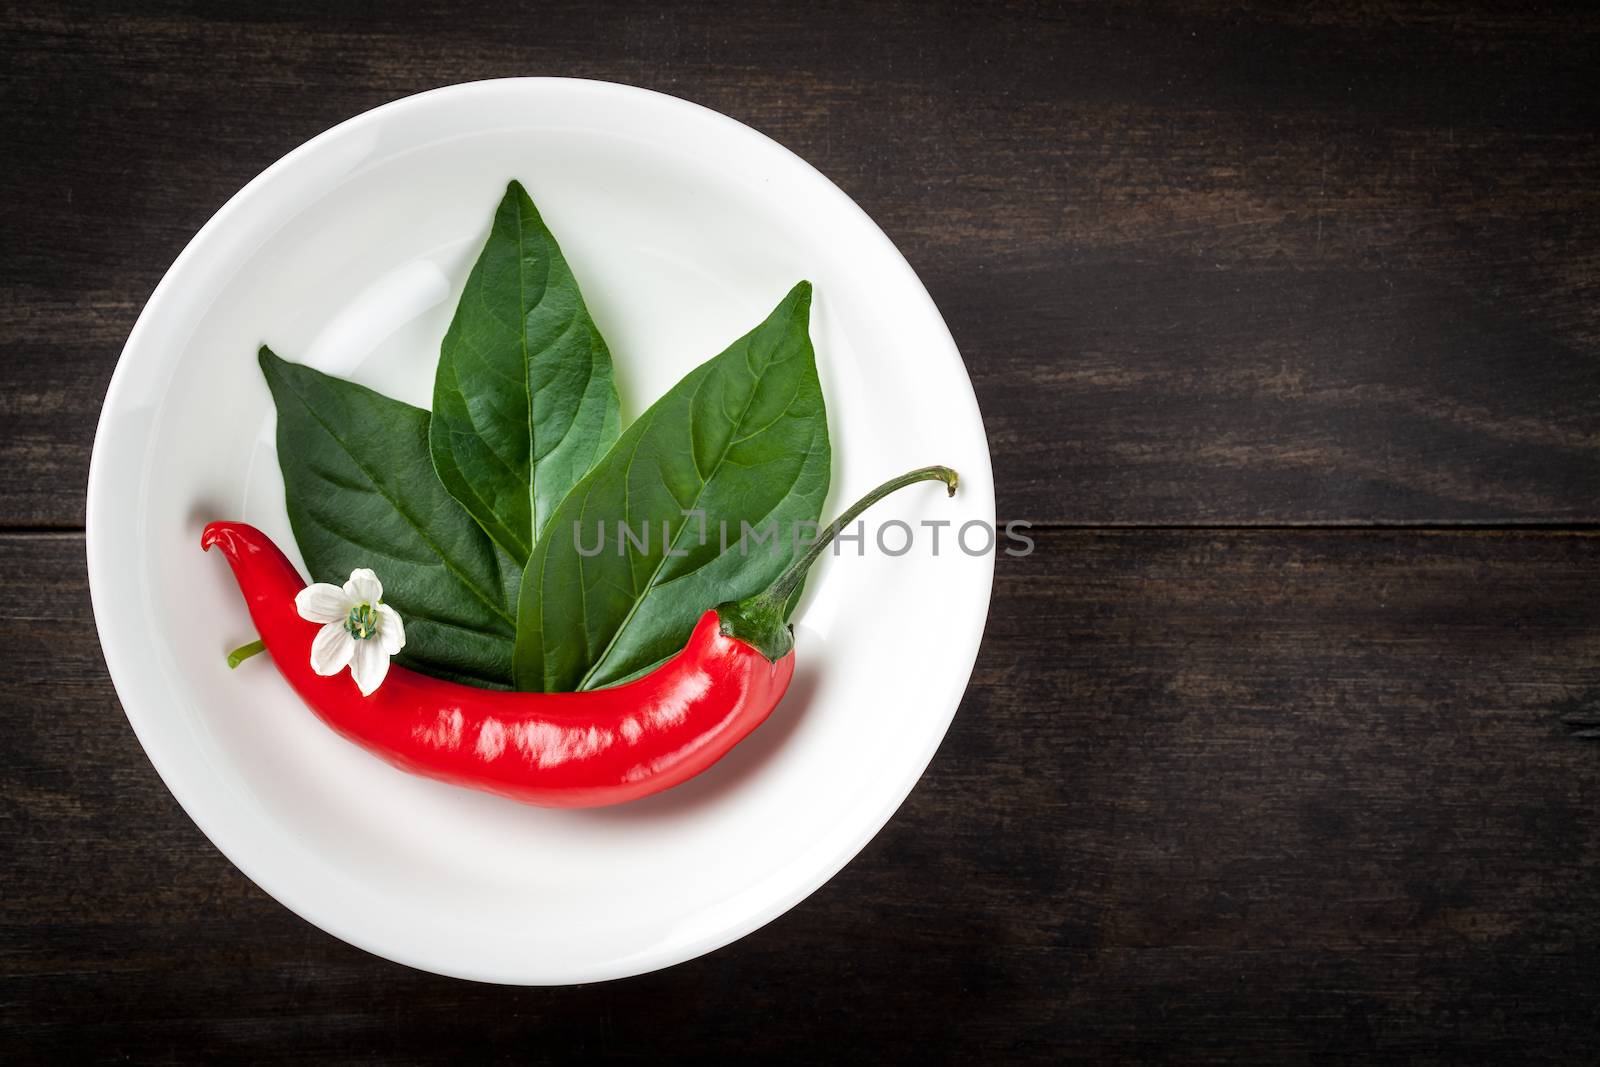 Chili pepper with leaves and flower on white plate on table background. Copy space. Top view